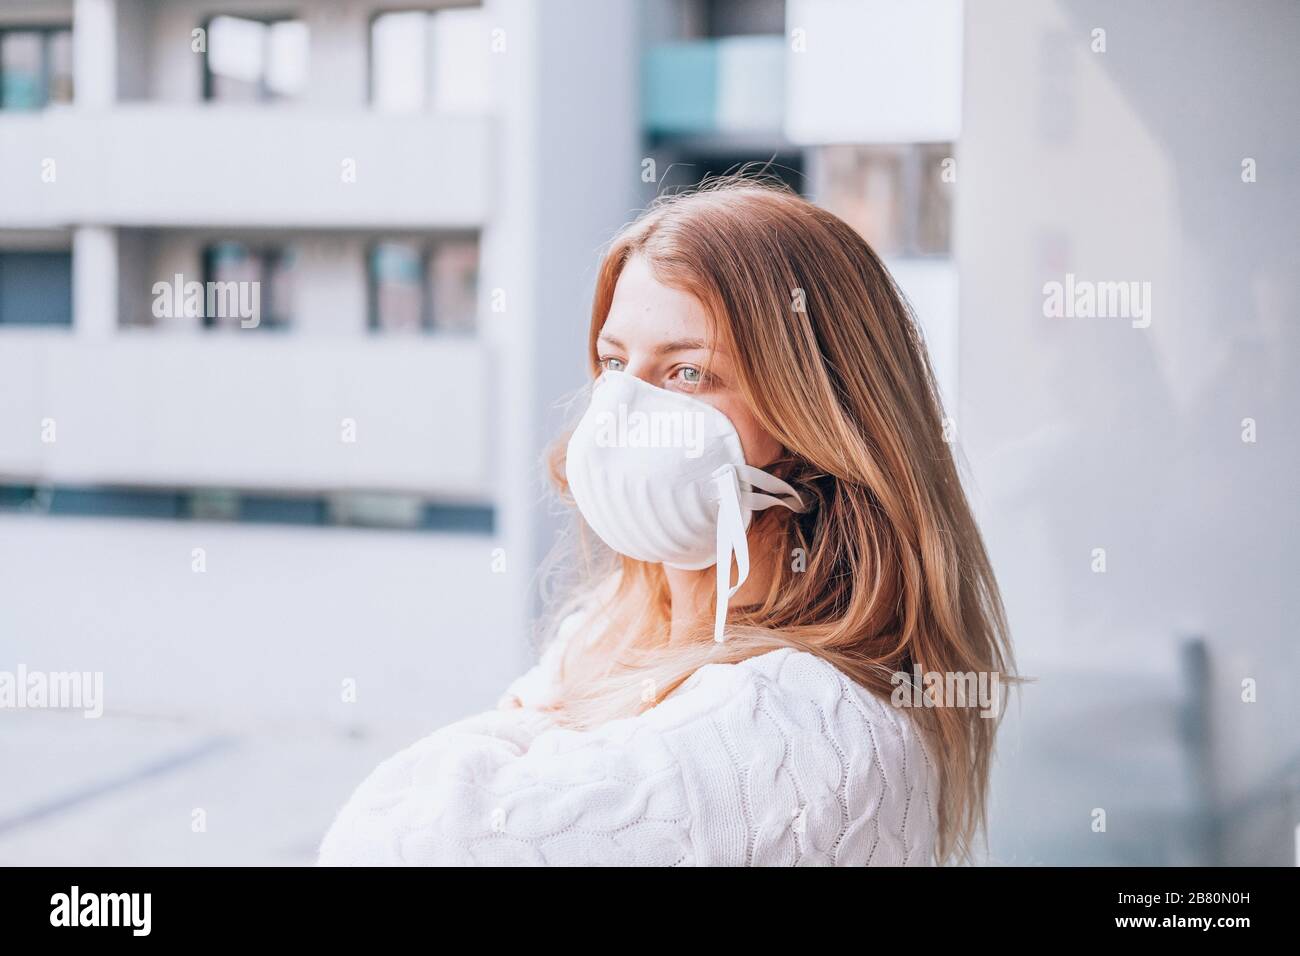 young woman wearing a face mask FFP3 Stock Photo